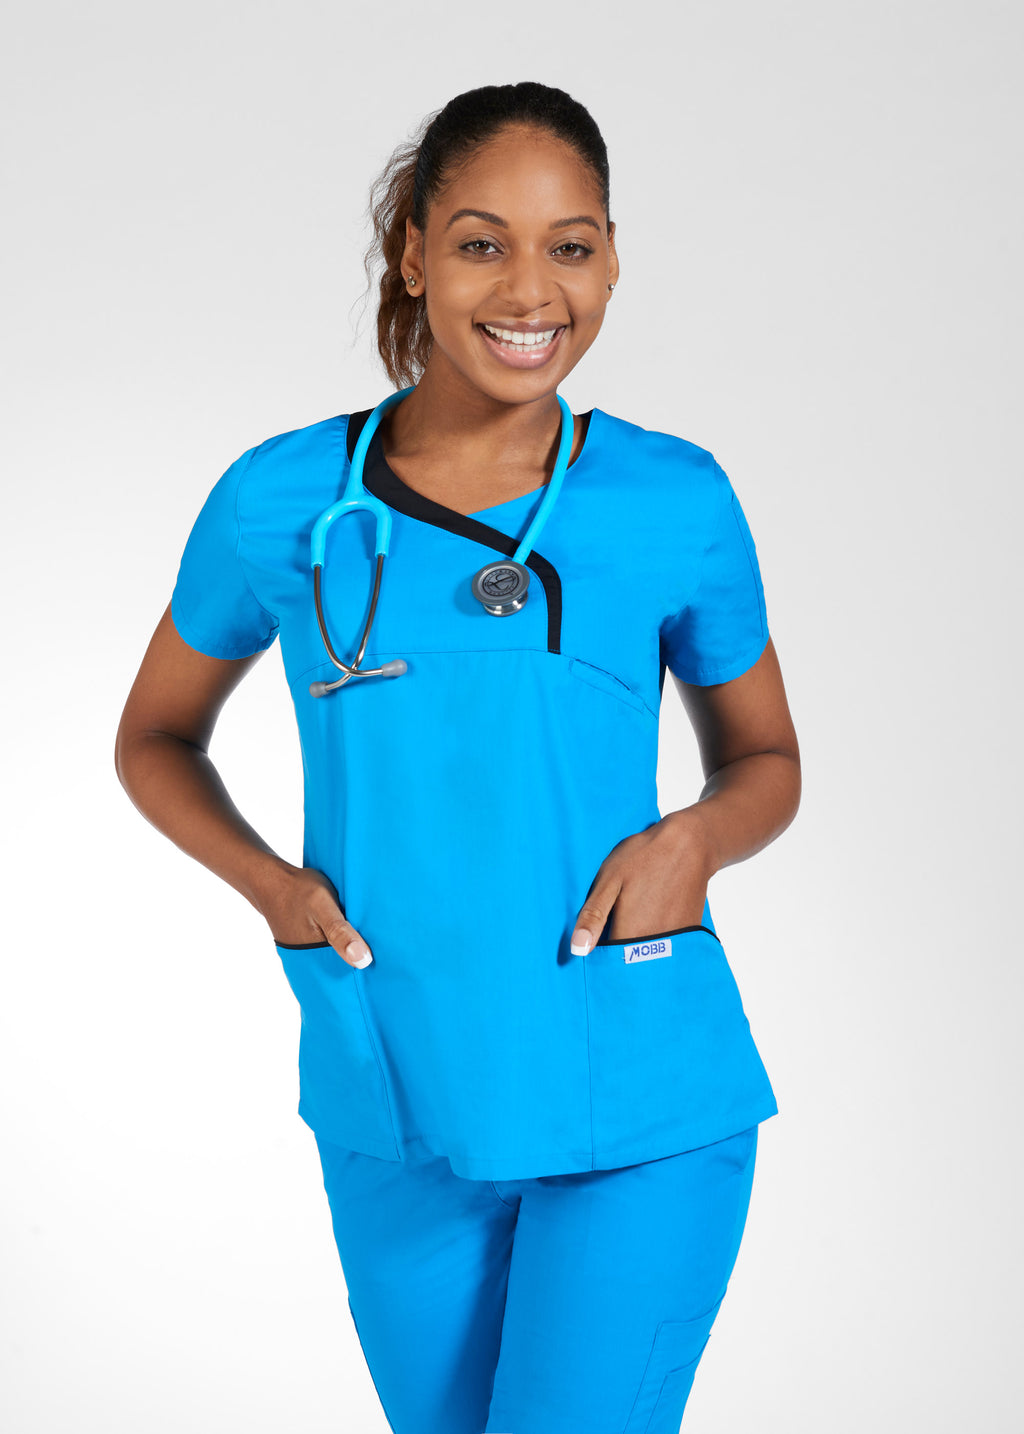 Product - Clearance Ladies Sculpted Scrub Top